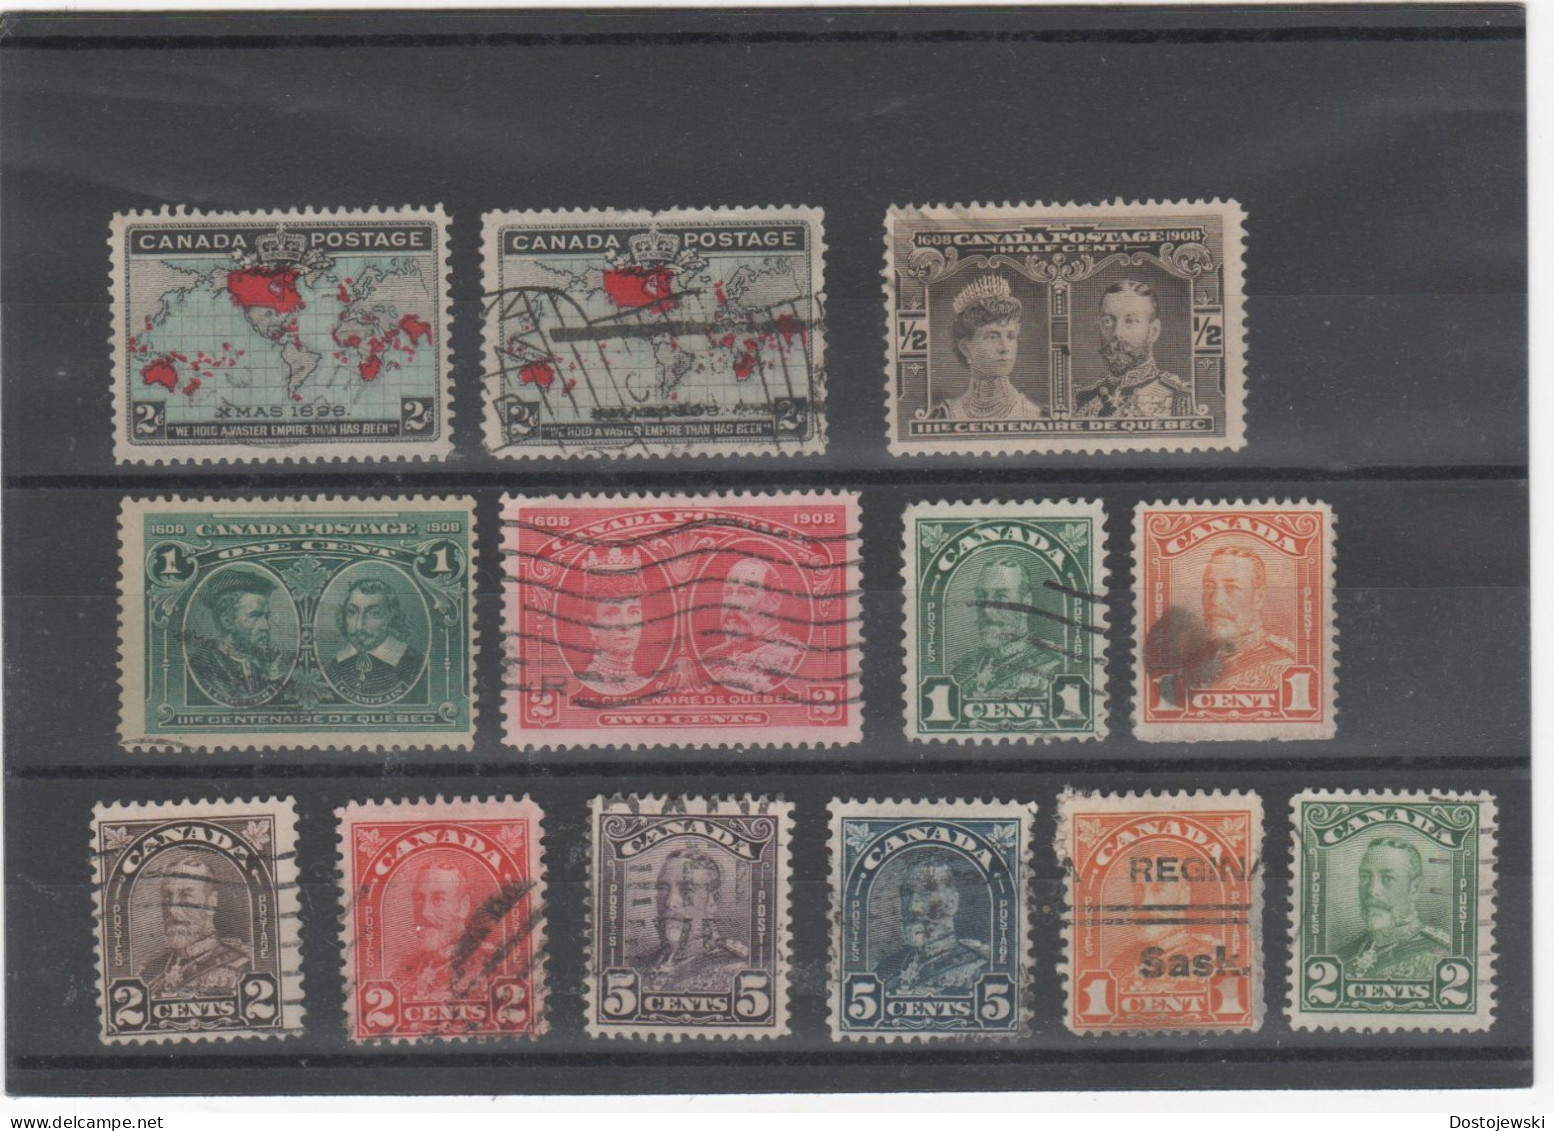 Canada - Kanada, Lot Of Used Stamps Ex 1898-c. 1930, 13 Stamps - Used Stamps